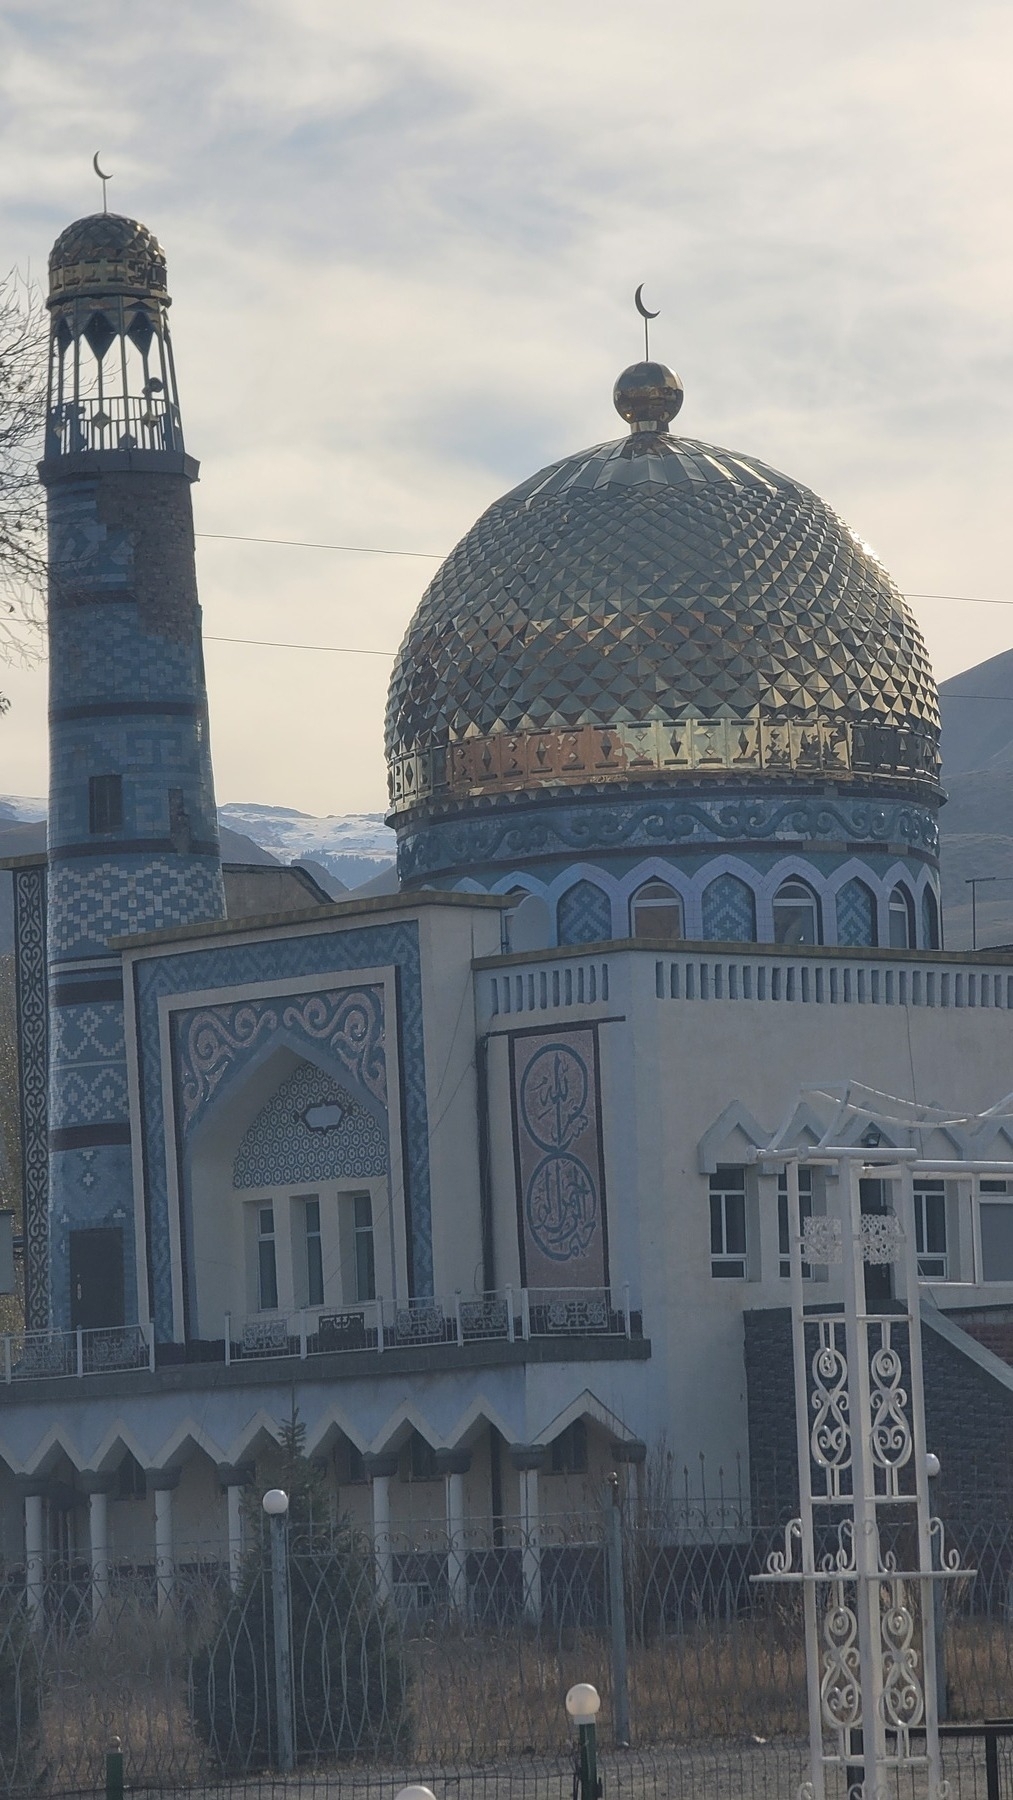 zoom in of a mosque with a golden dome roof and white and blue decoration